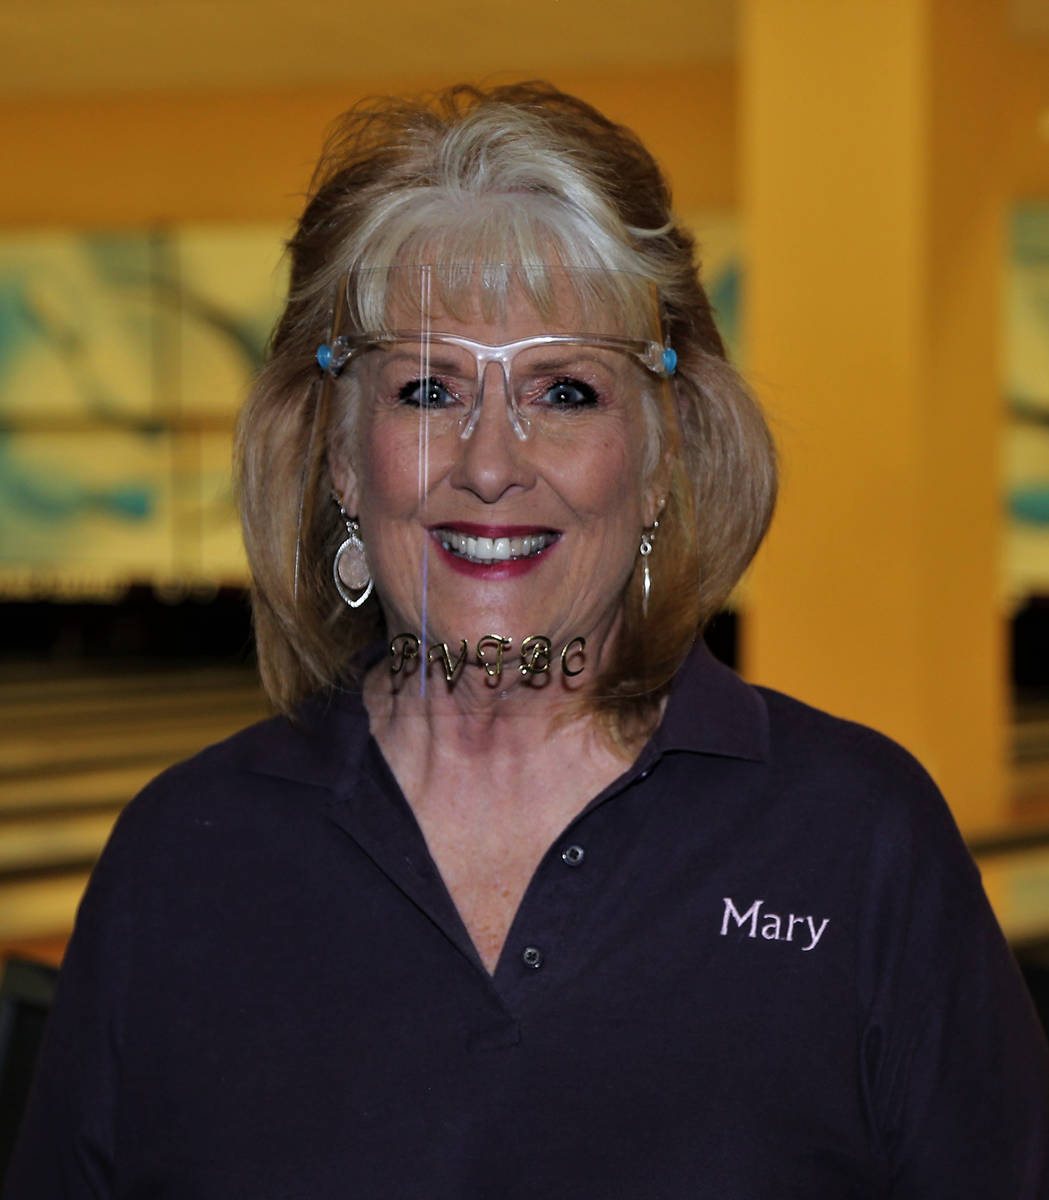 Randy Gulley/Special to the Pahrump Valley Times Mary Neese rolled games of 284, 265 and 300 fo ...